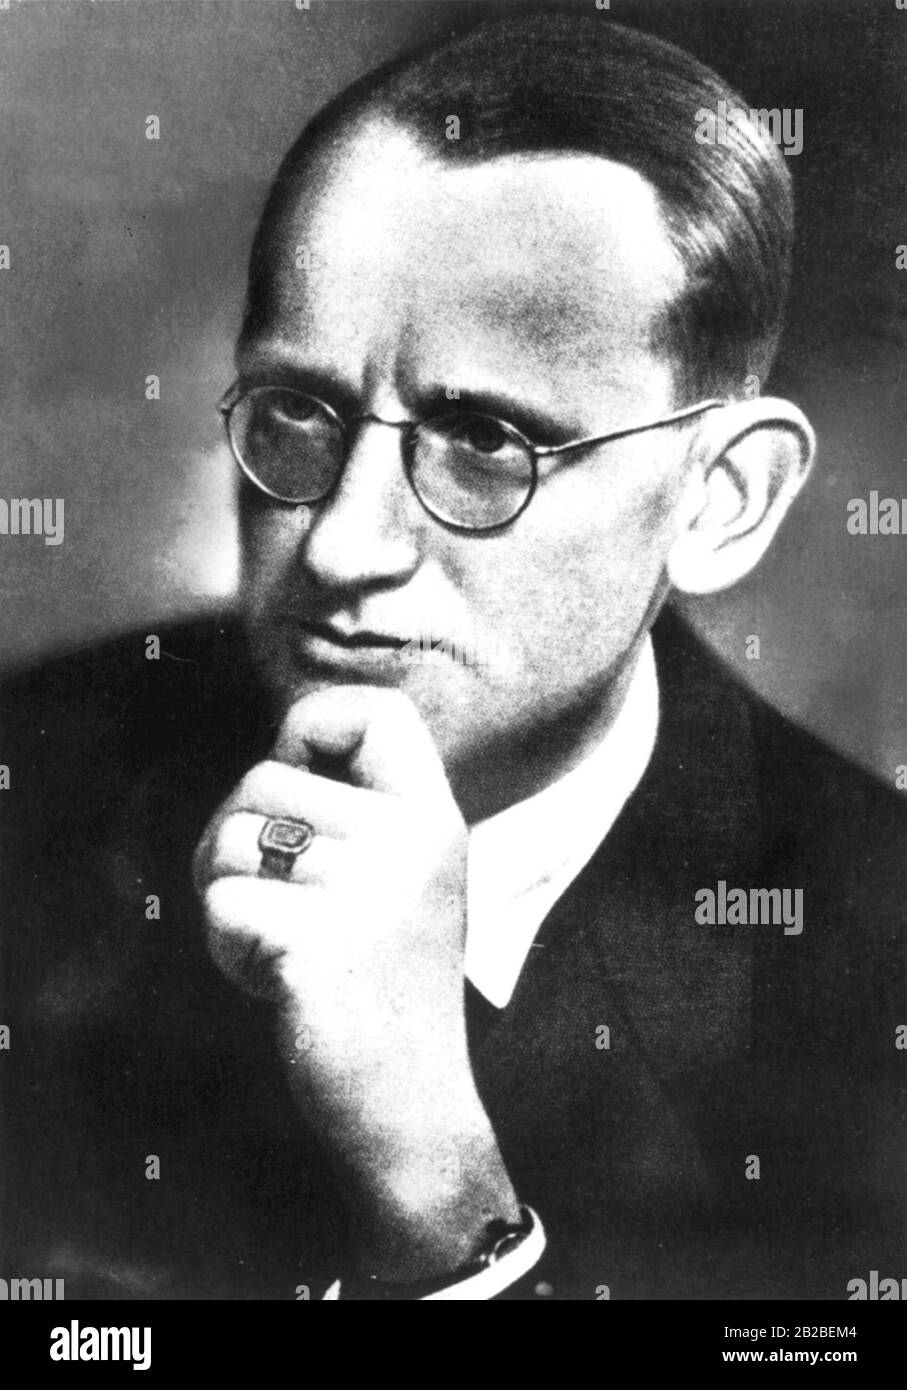 Fabian von Schlabrendorff (1907-1980), a German lawyer, resistance fighter in the Third Reich and later Federal Constitutional Court judge. (undated photo) Stock Photo